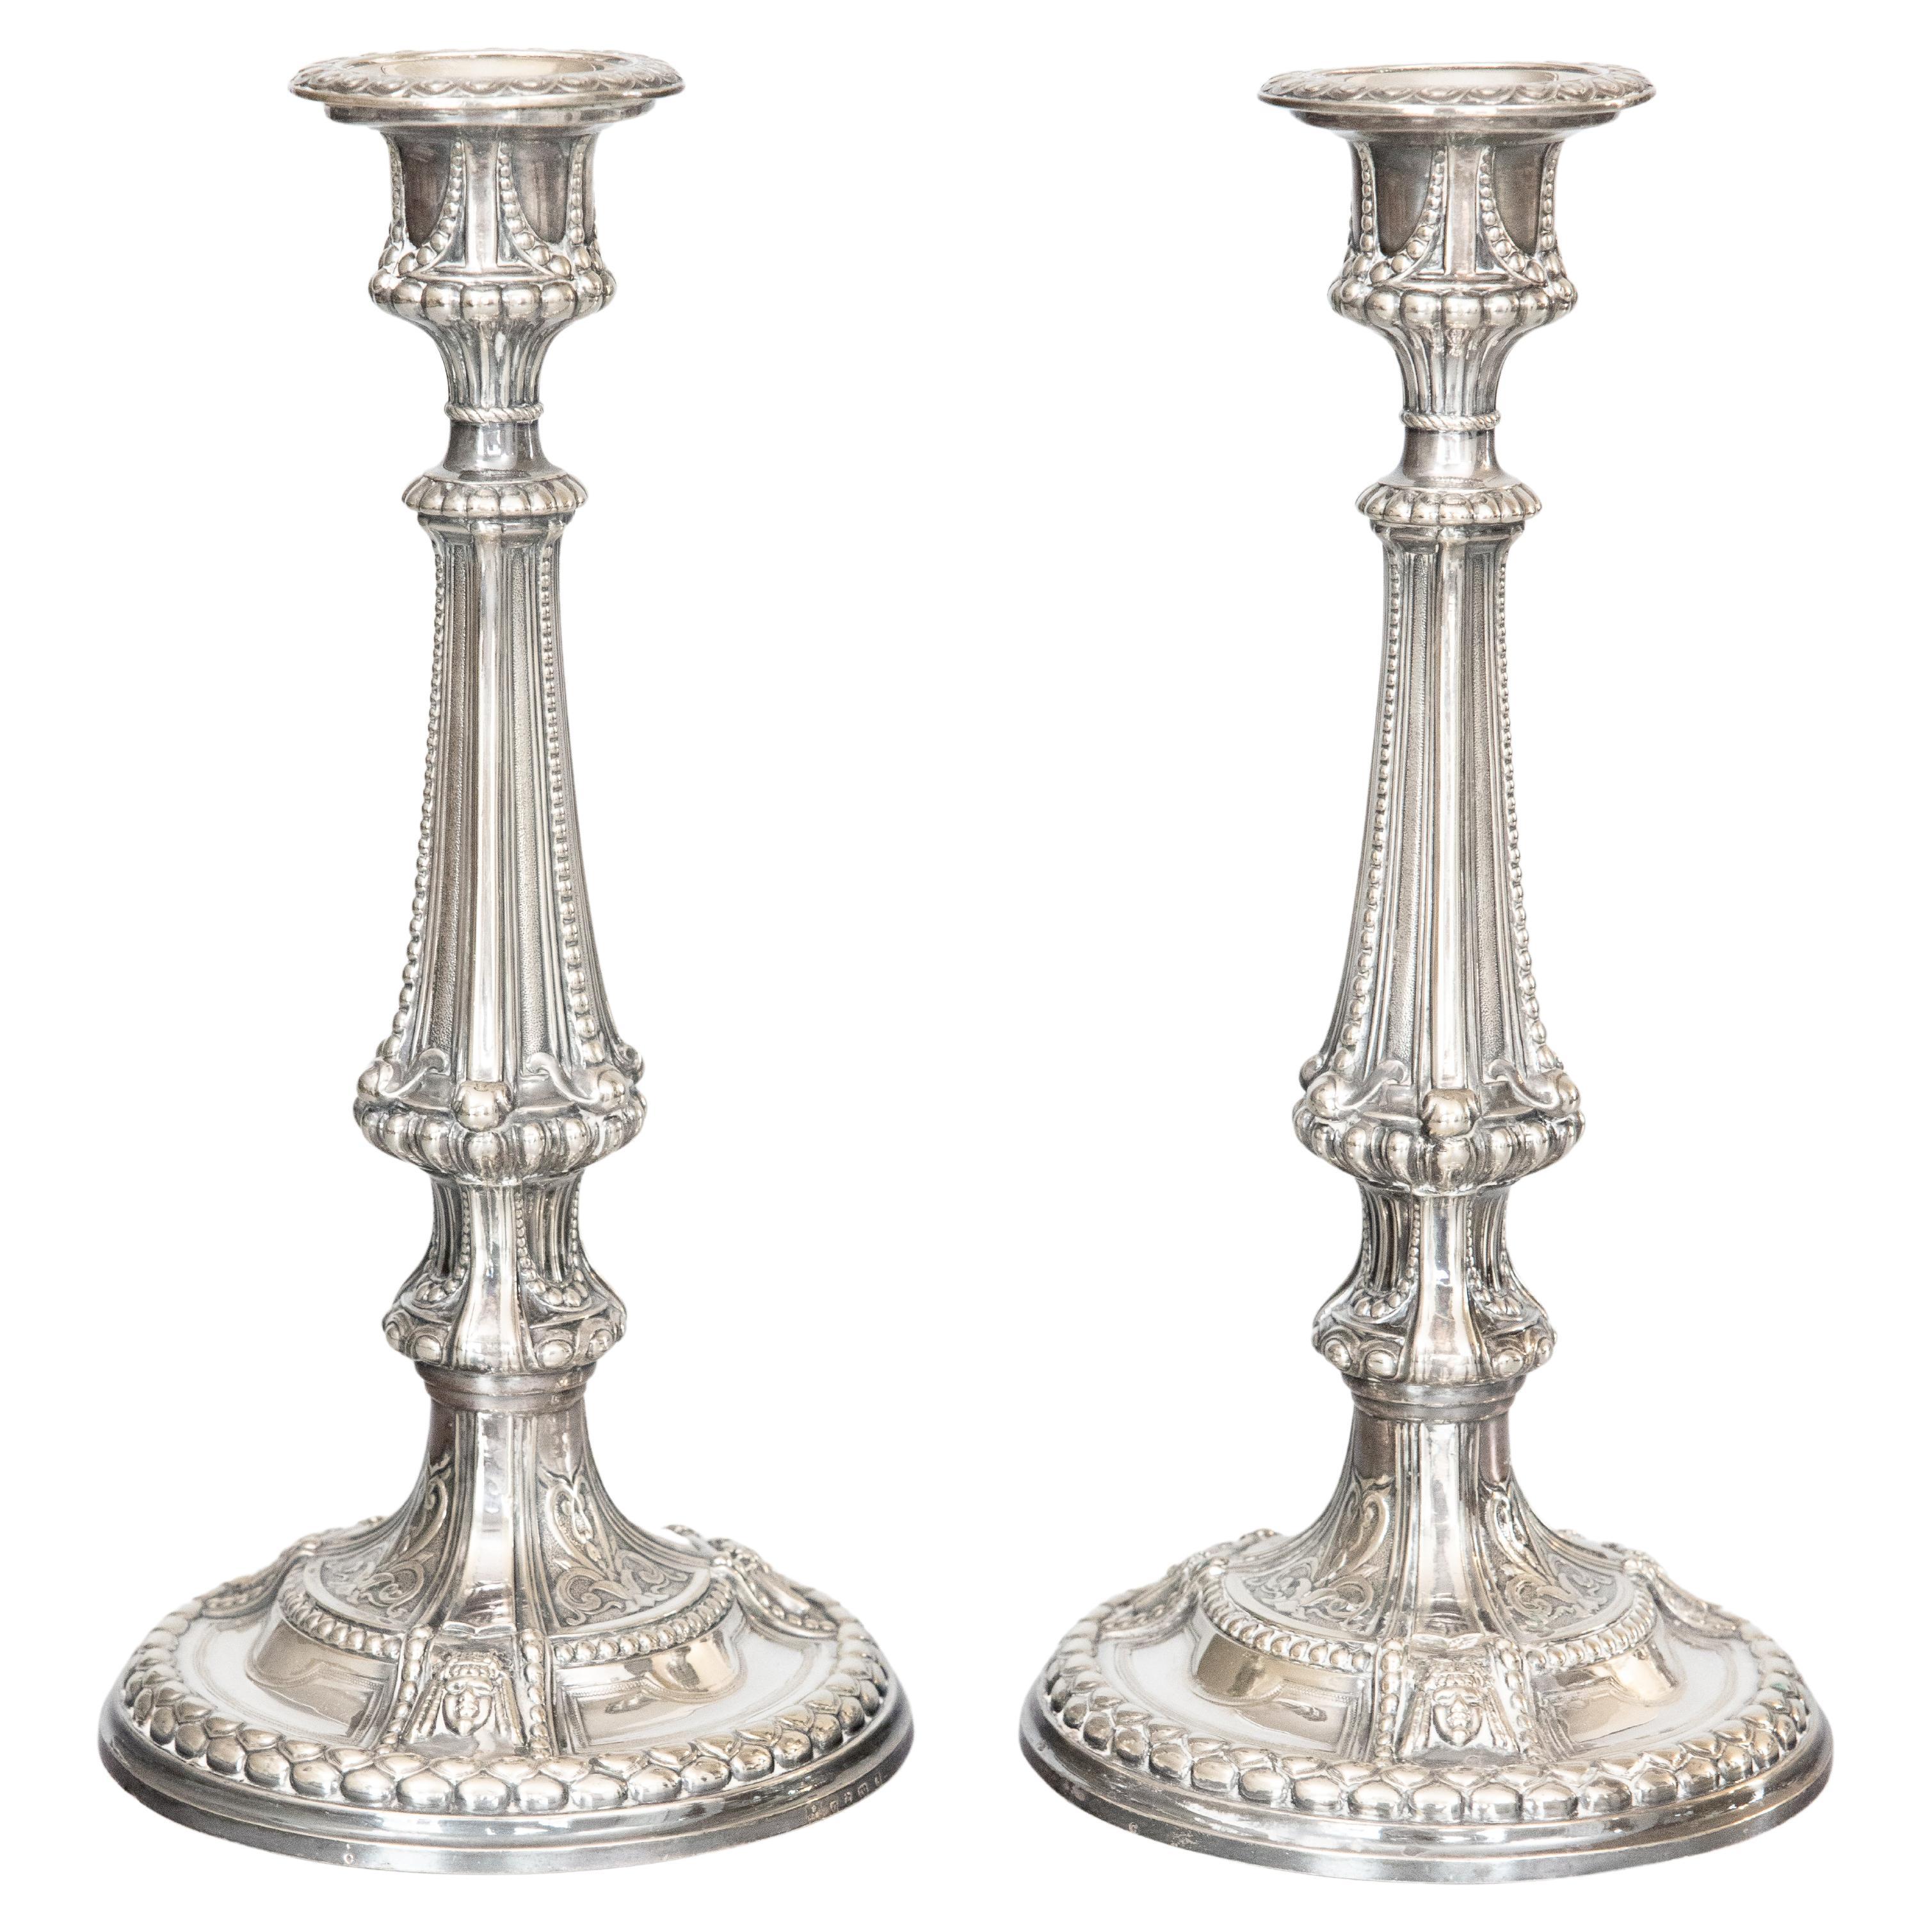 Pair of Antique Neoclassical Style English Silver Plate Candlesticks c. 1900